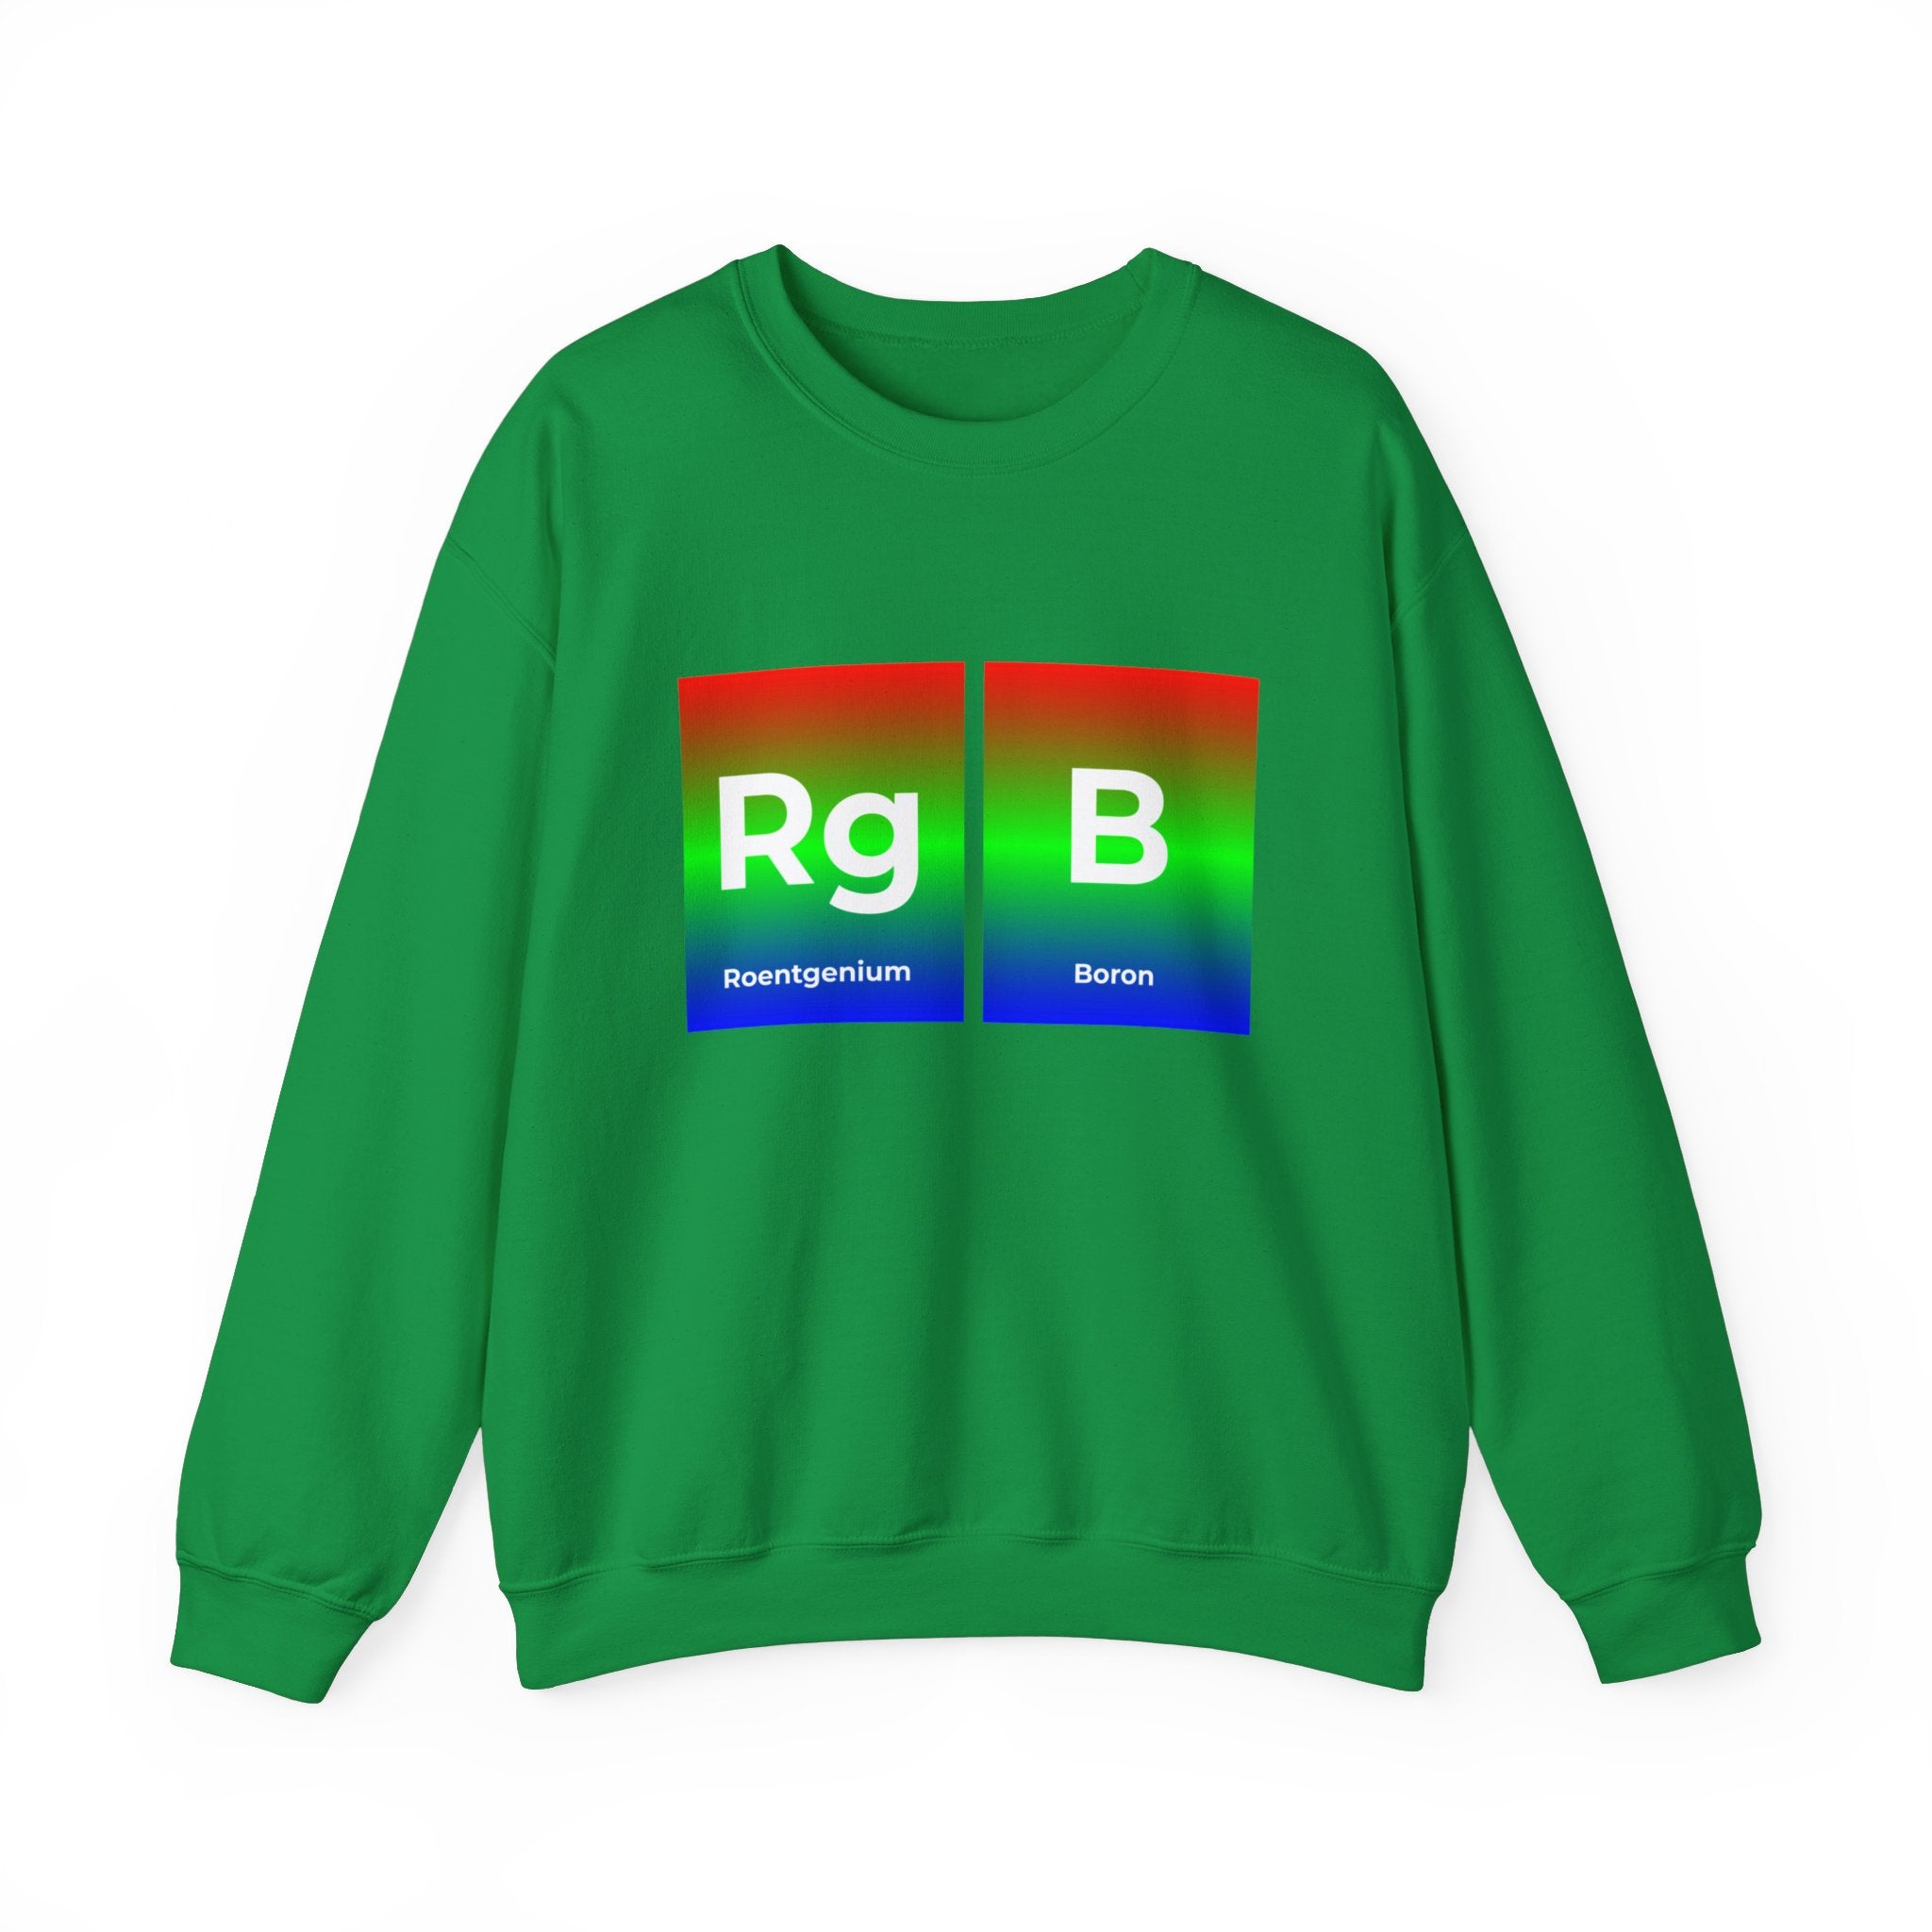 A cozy green RG-B - Sweatshirt featuring two periodic table elements, Roentgenium (Rg) and Boron (B), displayed in colorful blocks—perfect for comfort lovers with a stylish edge.